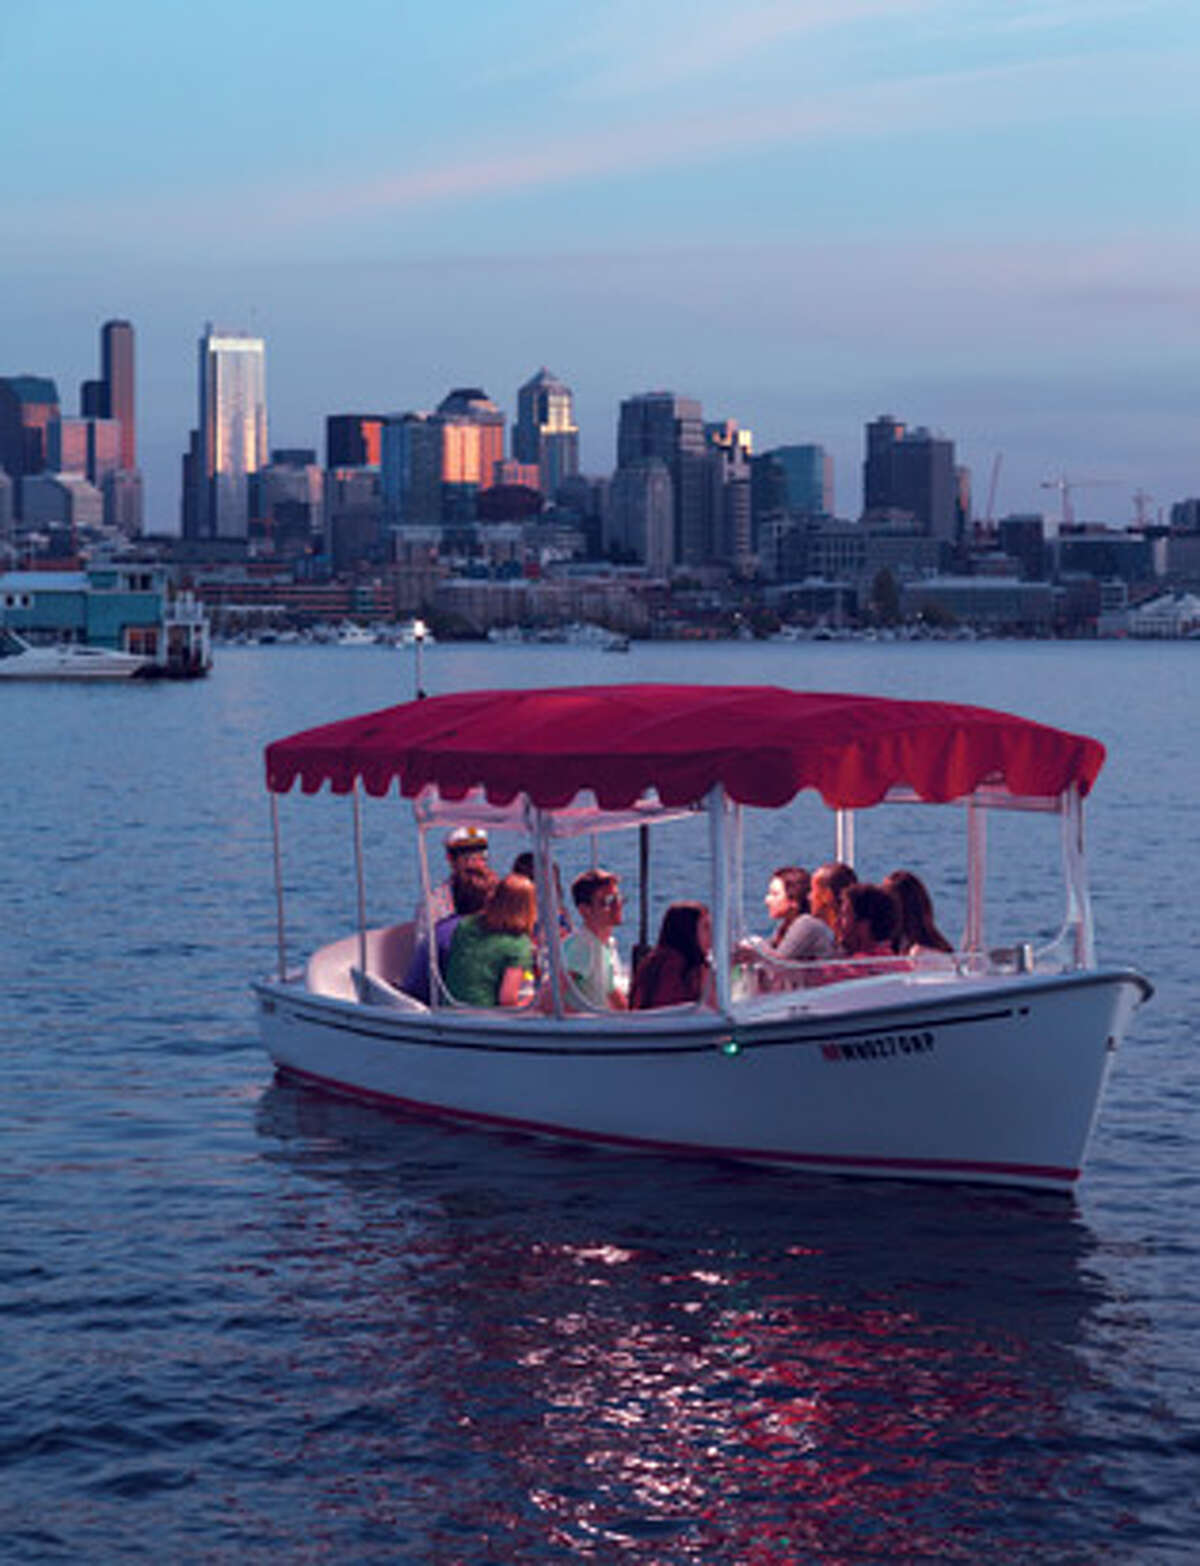 Electric Glide: While a way a summer evening on one of The Electric Boat Company's21-foot-long, 100-percent electric-powered (eco!) canopied boats launched from the west side of Lake Union. Hop aboard with friends (limit 10 passengers), some BYO beverages (beer or wine only), food and music, and motor yourself on a little tour of our city’s waterways. Each boat has plush seating and cocktail tables, and can be enclosed, should it rain on your summer parade. 2046 Westlake Ave. N, Suite 102; 206-223-7476. For the complete list of 30 perfect summer nights, visit Seattle Magazine's website.